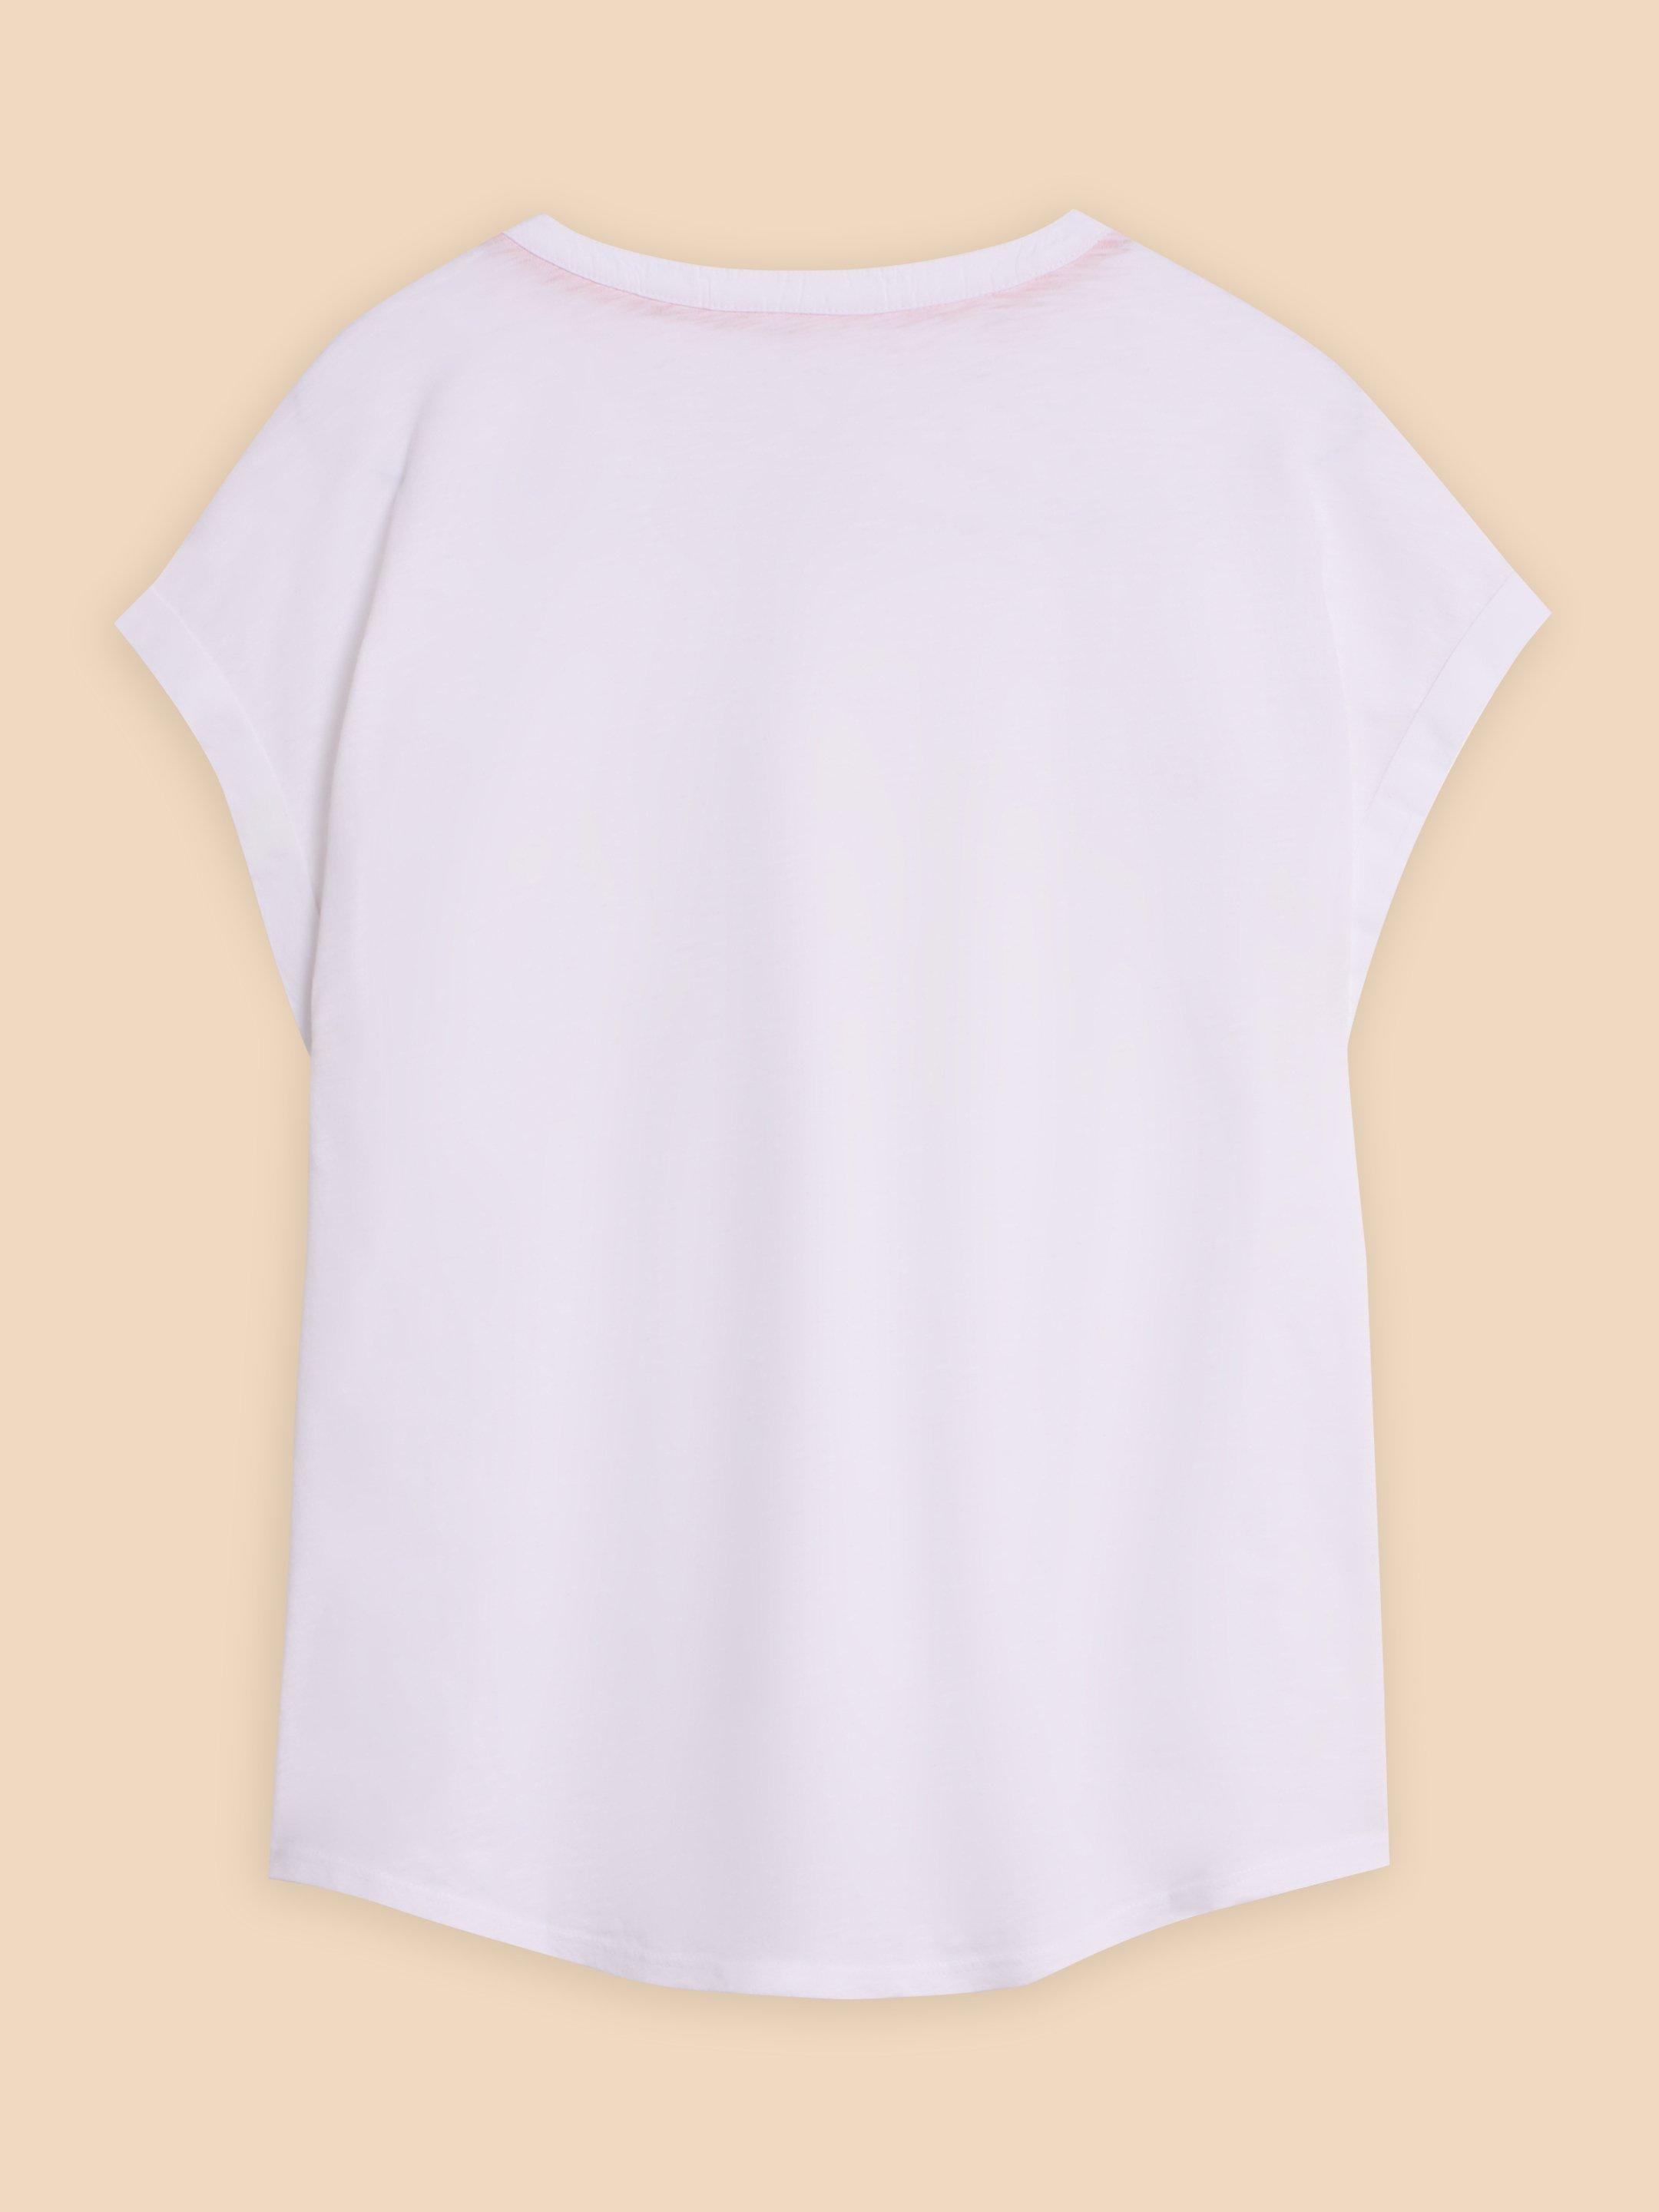 BETH JERSEY SHIRT in BRIL WHITE - FLAT BACK